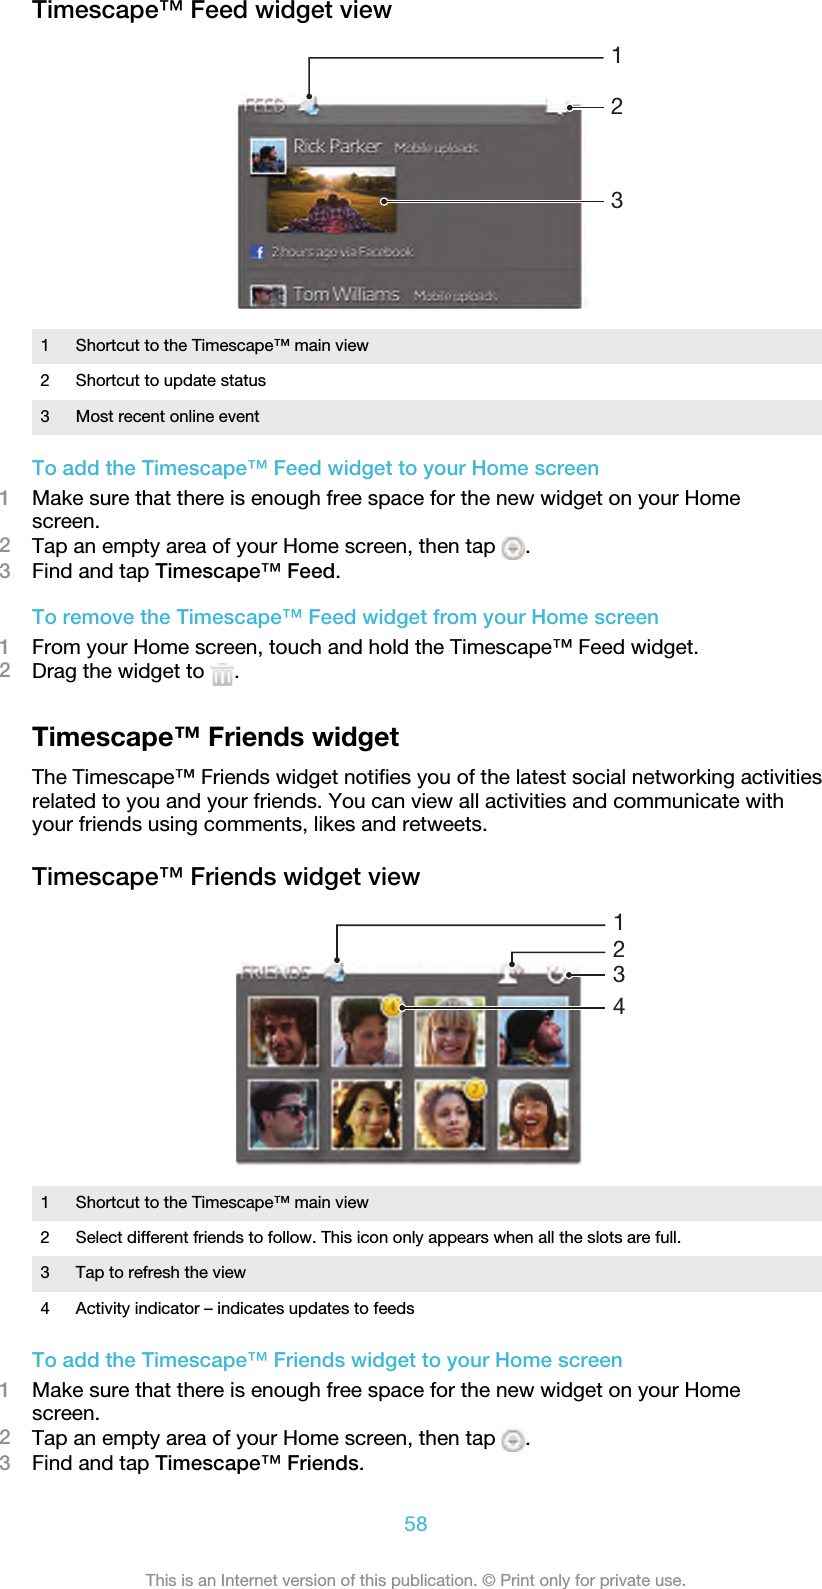 Timescape™ Feed widget view1231 Shortcut to the Timescape™ main view2 Shortcut to update status3 Most recent online eventTo add the Timescape™ Feed widget to your Home screen1Make sure that there is enough free space for the new widget on your Homescreen.2Tap an empty area of your Home screen, then tap  .3Find and tap Timescape™ Feed.To remove the Timescape™ Feed widget from your Home screen1From your Home screen, touch and hold the Timescape™ Feed widget.2Drag the widget to  .Timescape™ Friends widgetThe Timescape™ Friends widget notifies you of the latest social networking activitiesrelated to you and your friends. You can view all activities and communicate withyour friends using comments, likes and retweets.Timescape™ Friends widget view13421Shortcut to the Timescape™ main view2 Select different friends to follow. This icon only appears when all the slots are full.3 Tap to refresh the view4 Activity indicator – indicates updates to feedsTo add the Timescape™ Friends widget to your Home screen1Make sure that there is enough free space for the new widget on your Homescreen.2Tap an empty area of your Home screen, then tap  .3Find and tap Timescape™ Friends.58This is an Internet version of this publication. © Print only for private use.